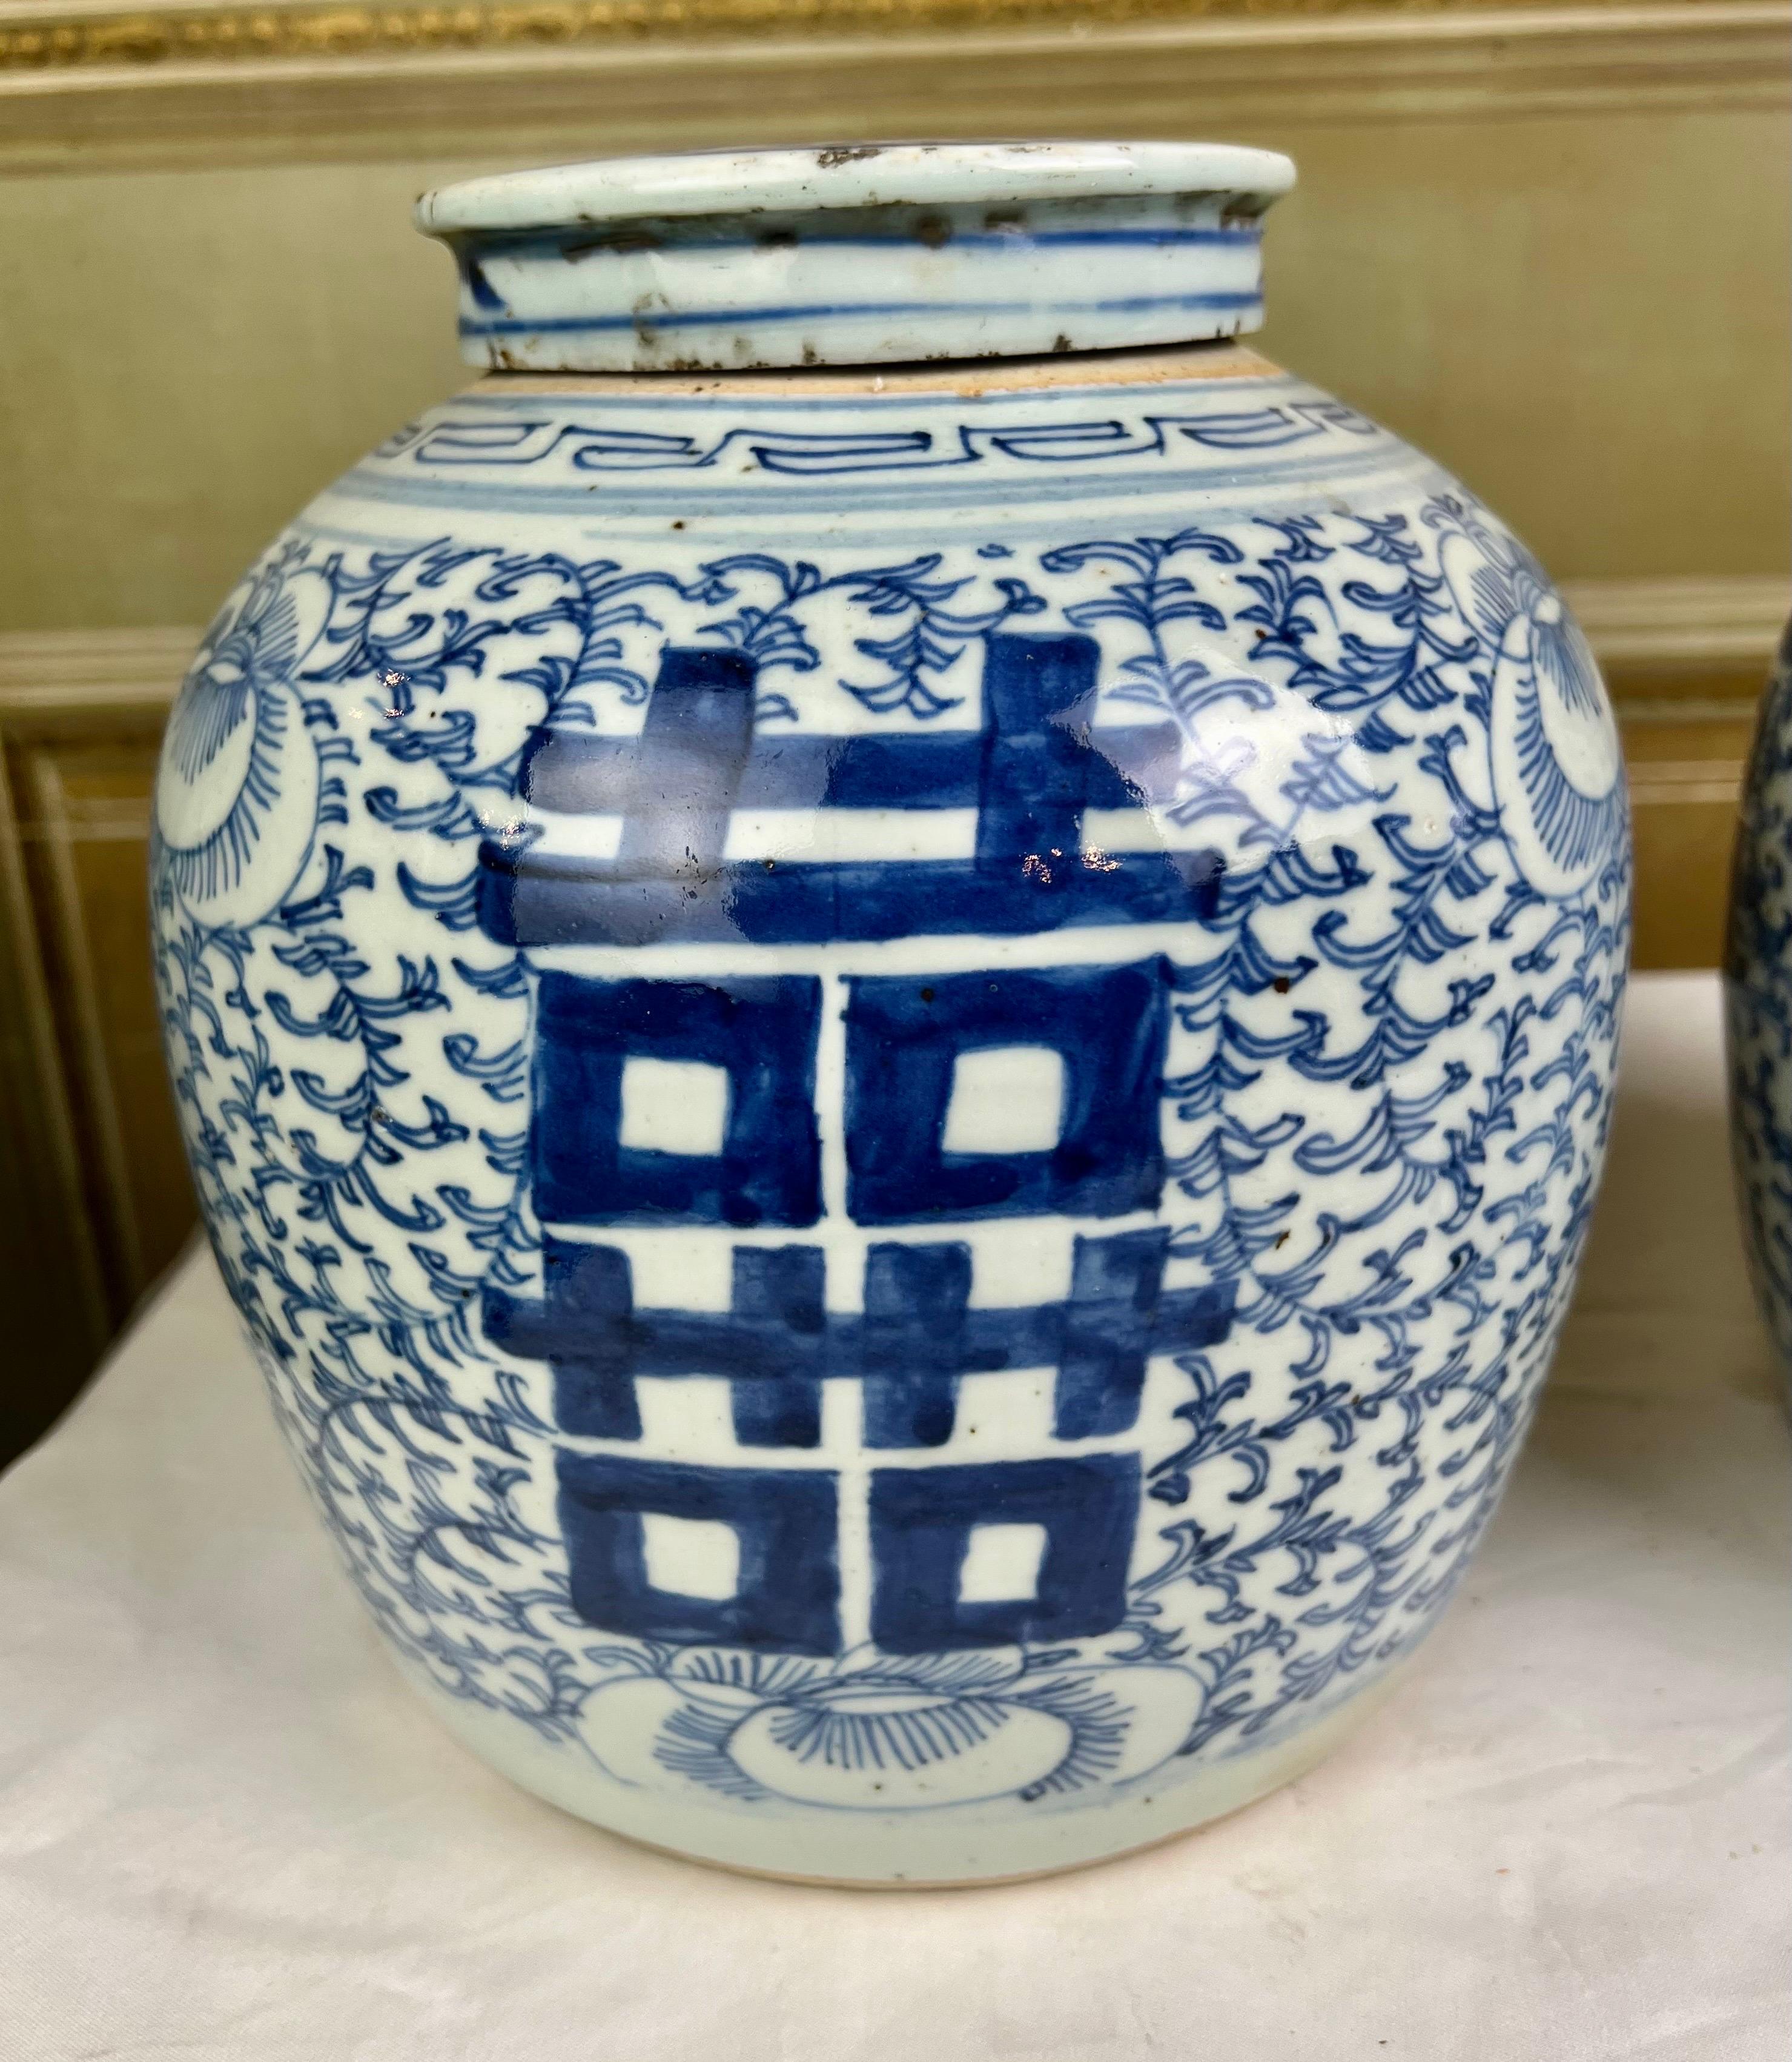 Porcelain Pair of 17th Century Chinese Export Ginger Jars with Lids